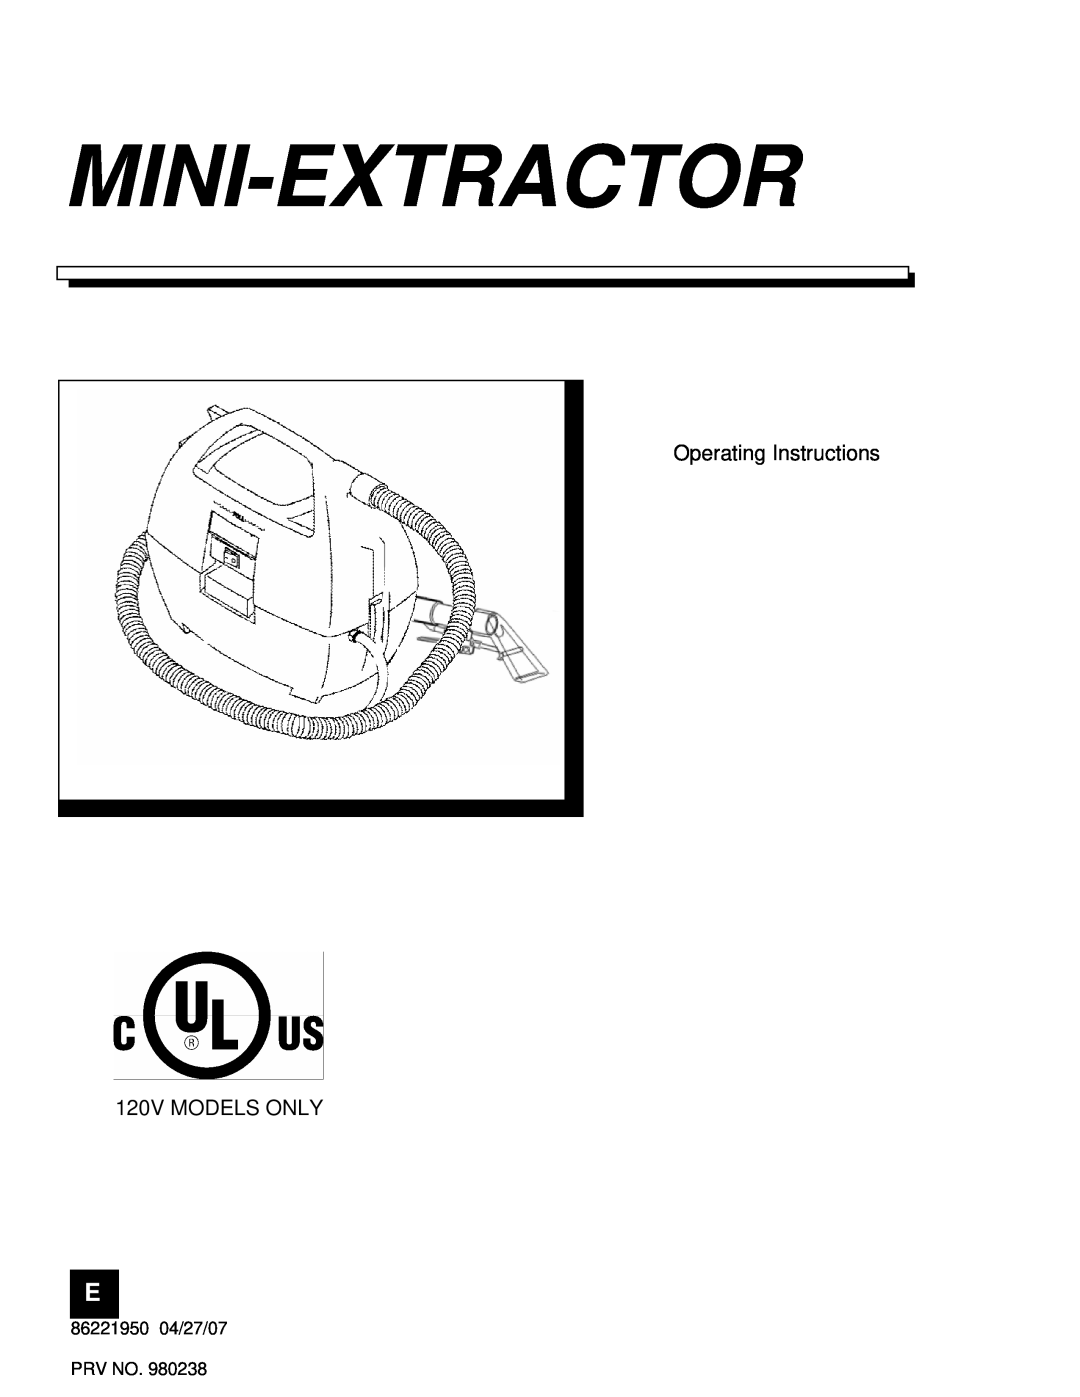 Windsor 86221950 manual Mini-Extractor, Operating Instructions GB/USA 120V MODELS ONLY 